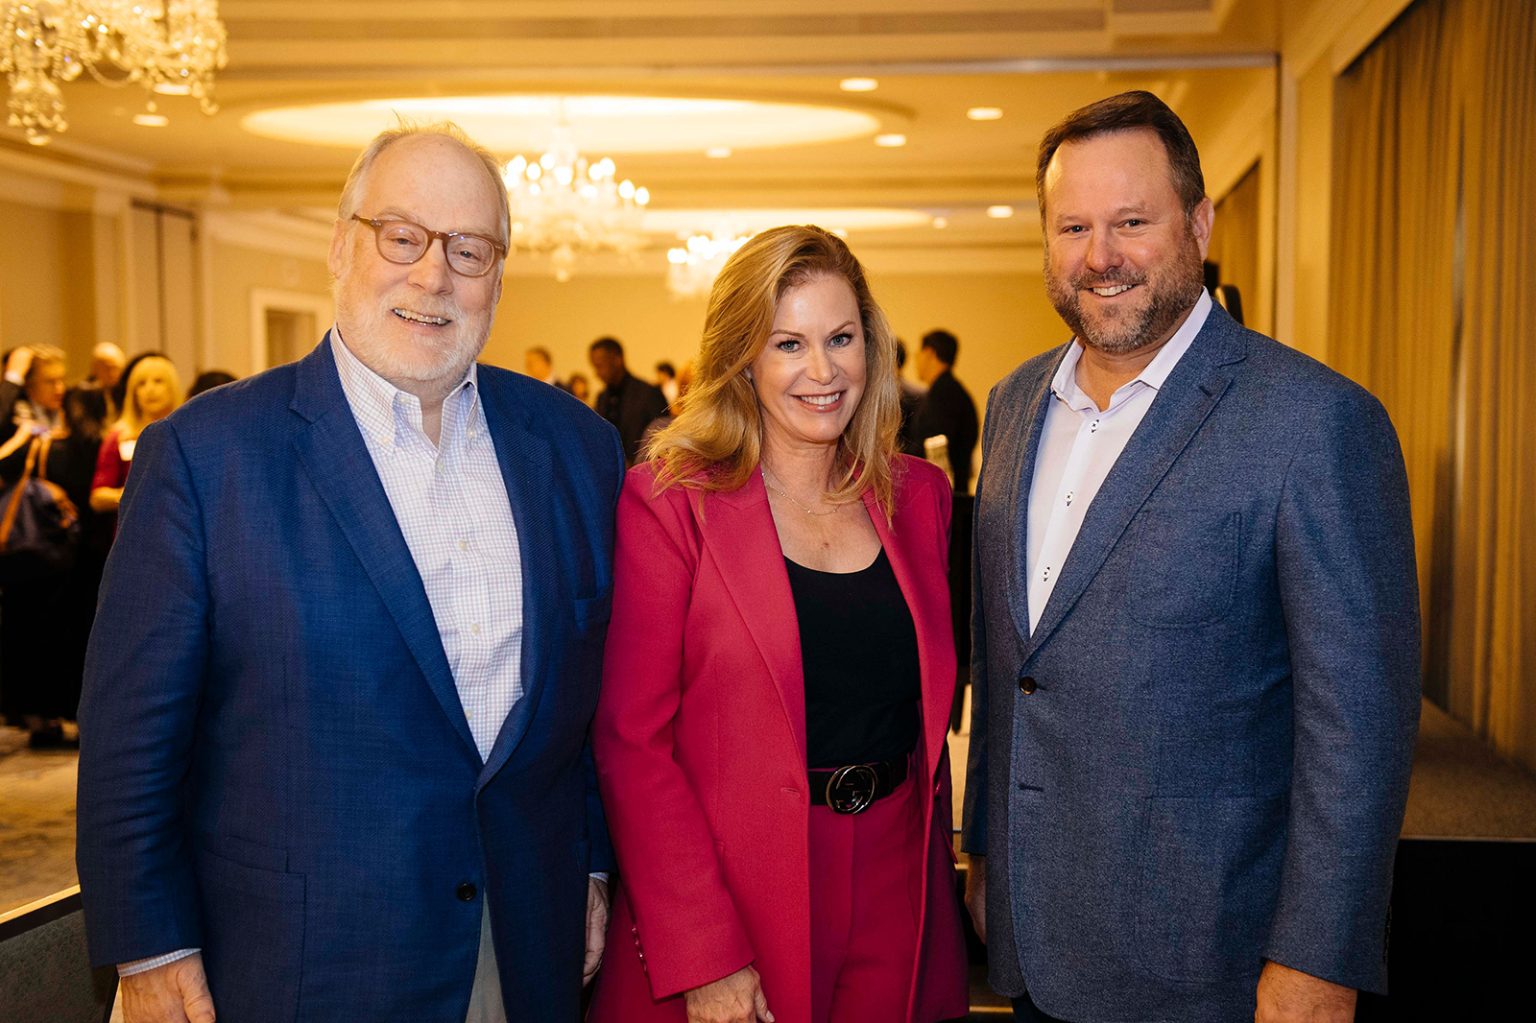 Luncheon speakers offering more perspectives on the 2022 elections are (from left) Mike Murphy, USC Center for the Political Future; Stephanie Cutter, Precision; and moderator Rob Stutzman, Stutzman Strategies.